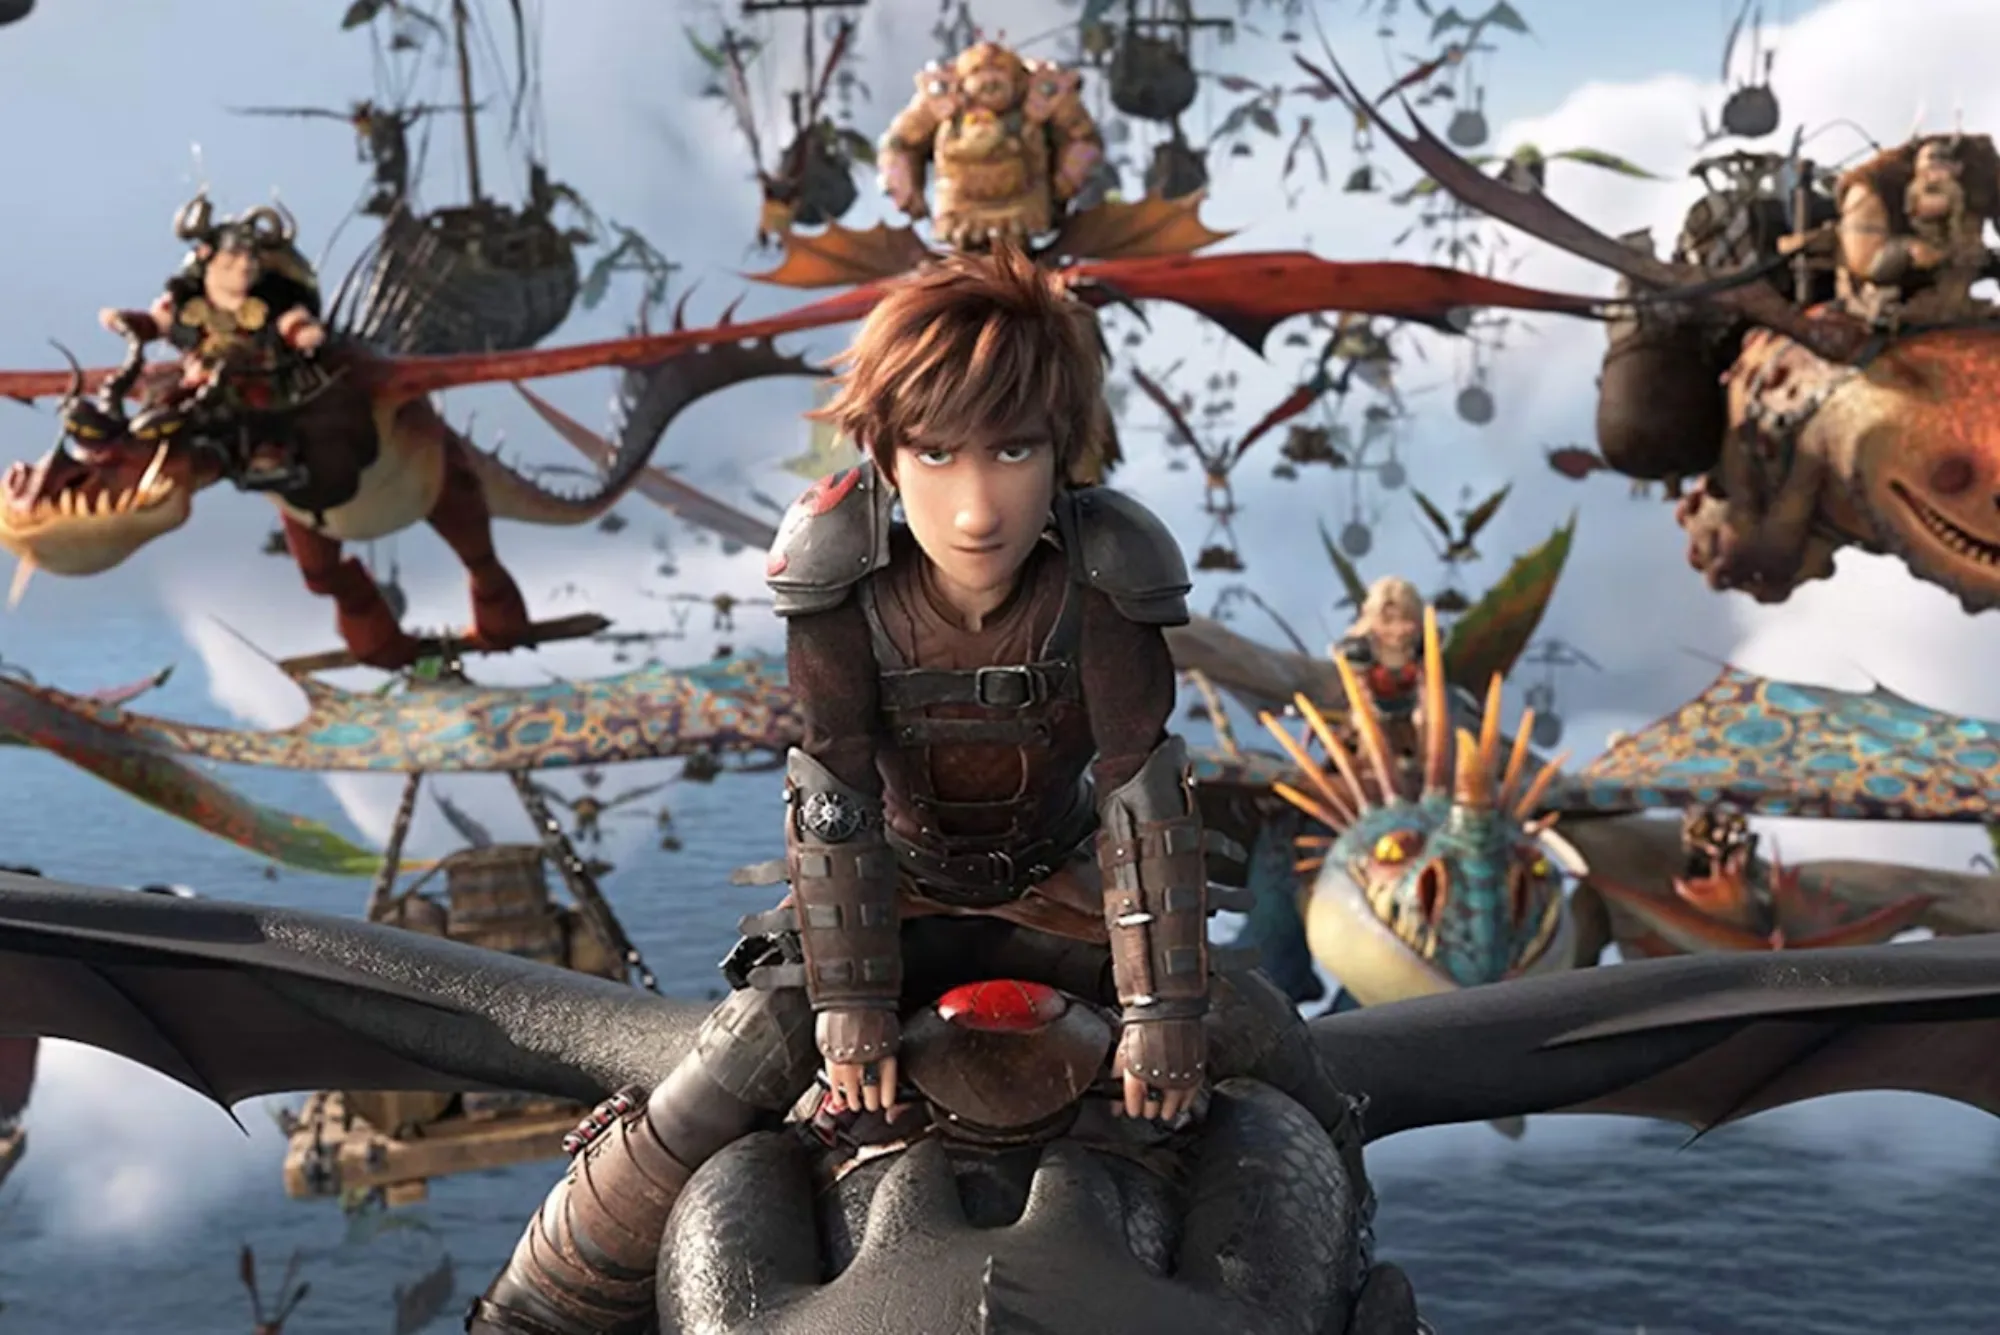 How to Train Your Dragon 3 Full Movie